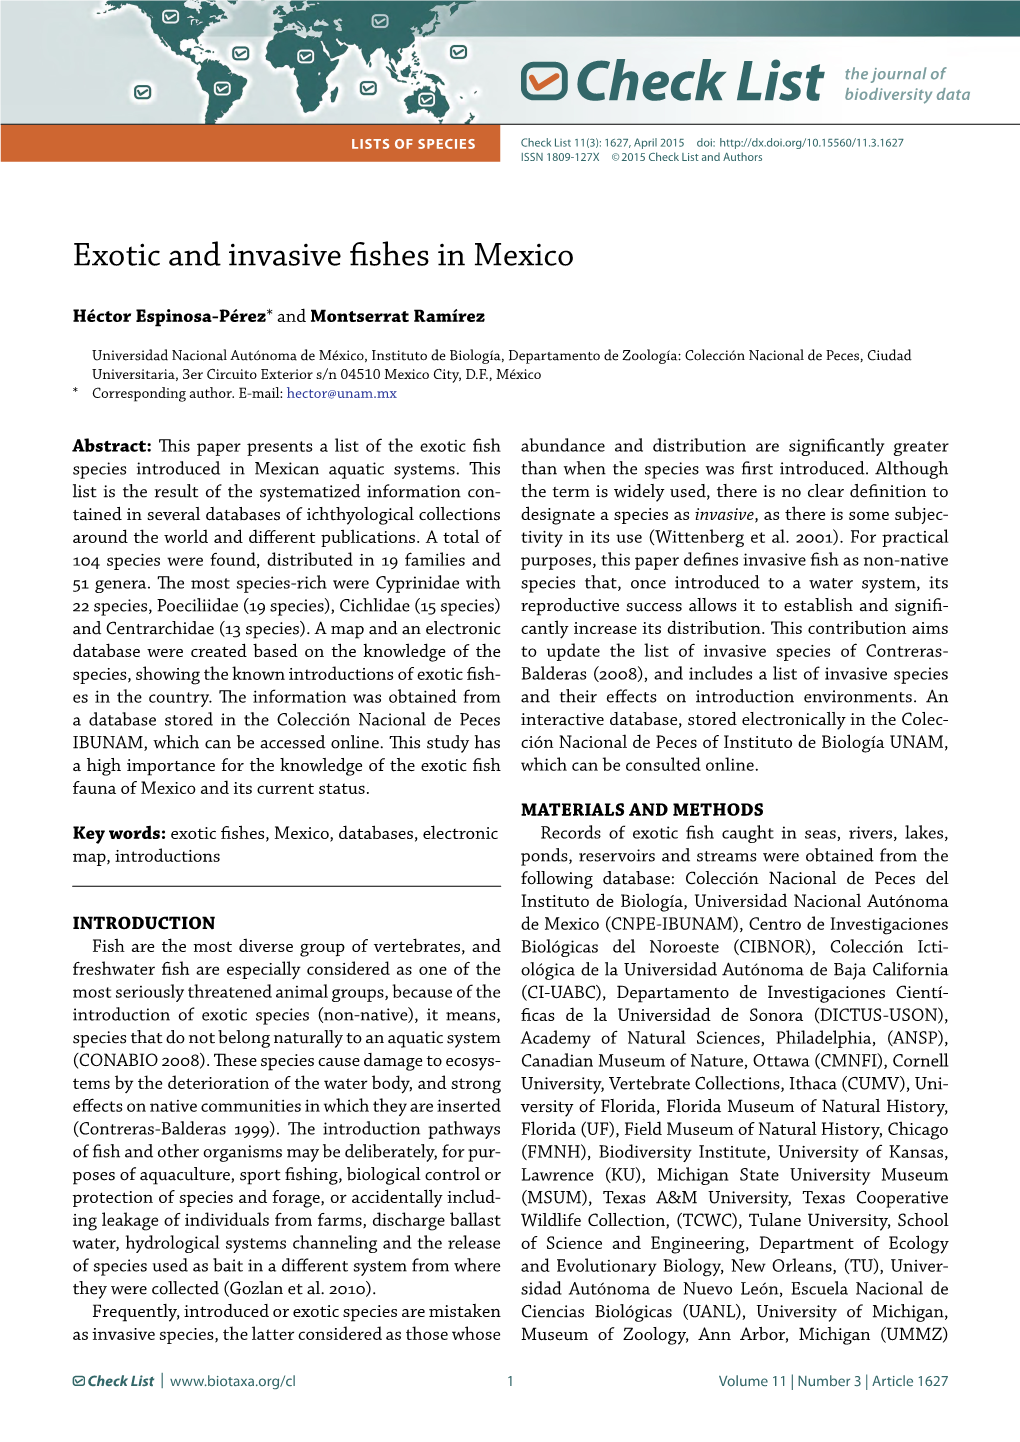 Exotic and Invasive Fishes in Mexico